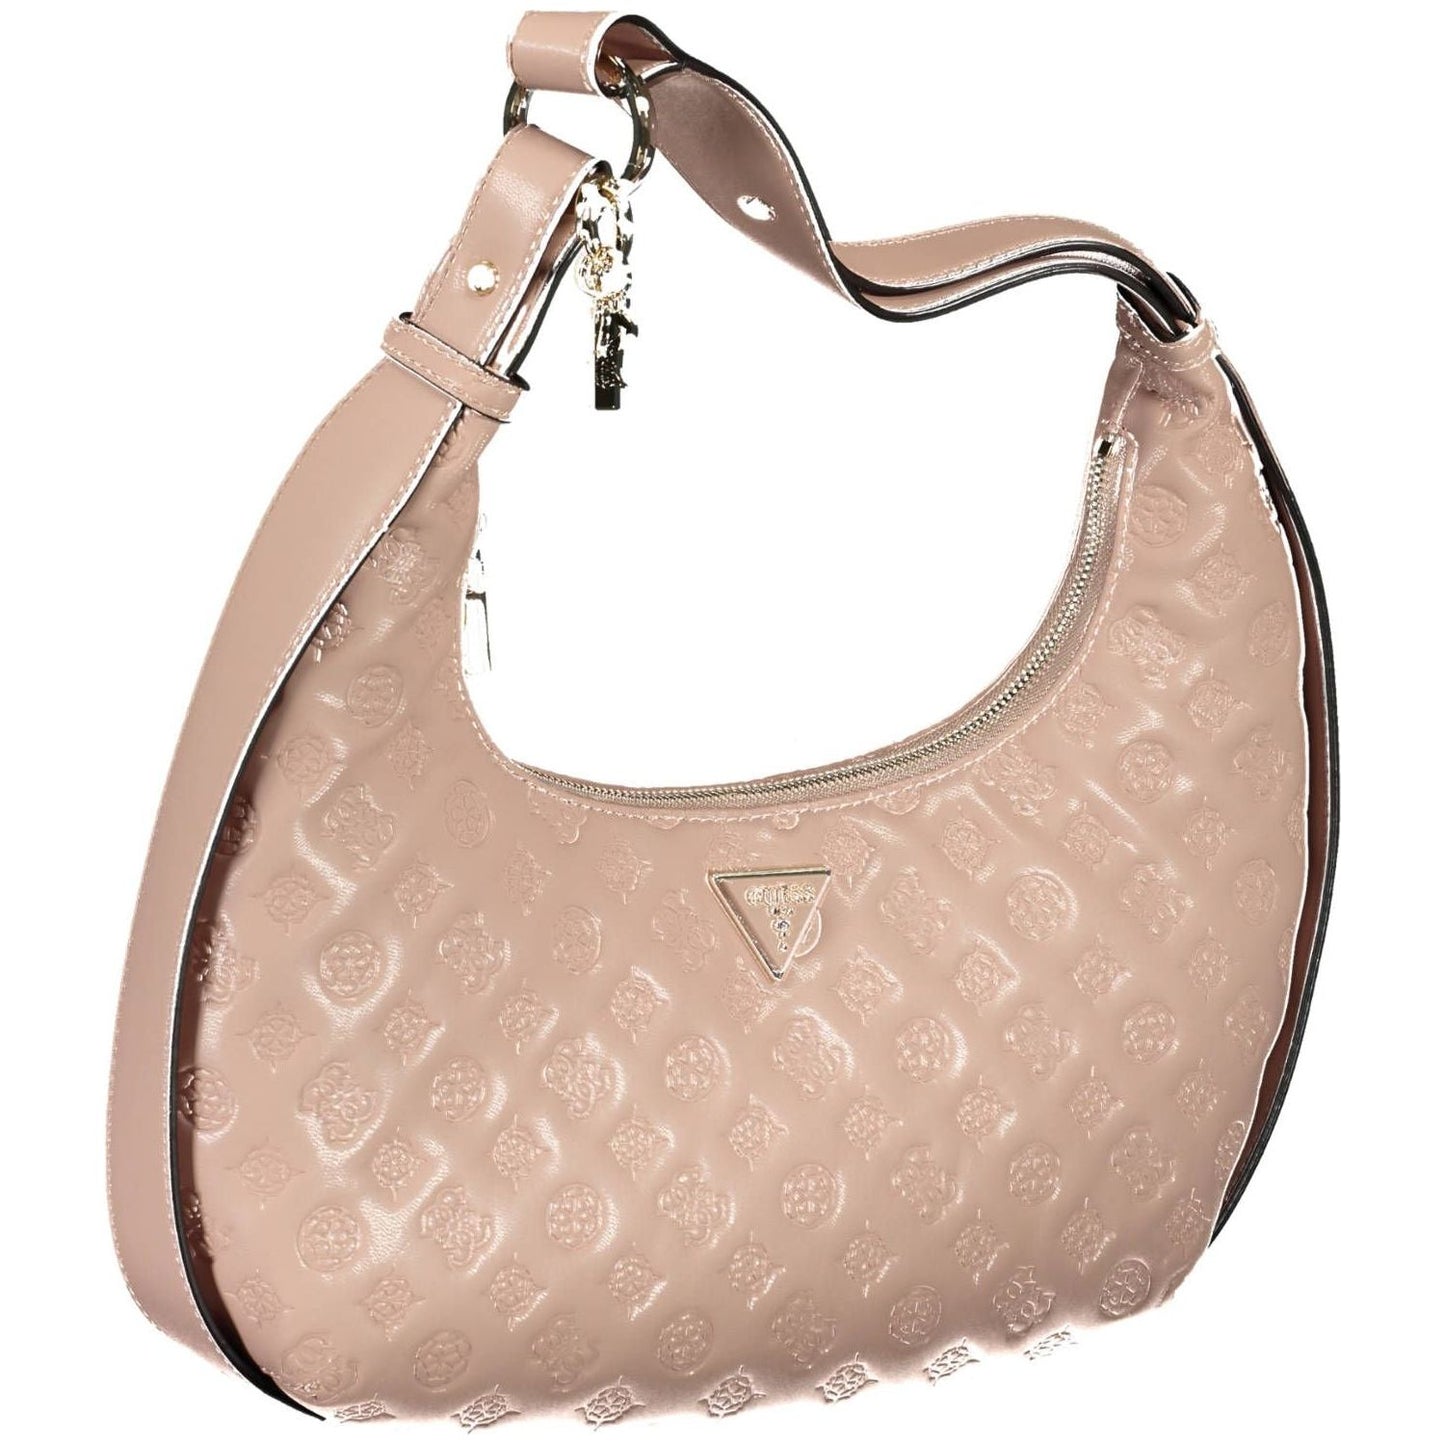 Guess Jeans Chic Pink Contrasting Details Shoulder Bag chic-pink-contrasting-details-shoulder-bag